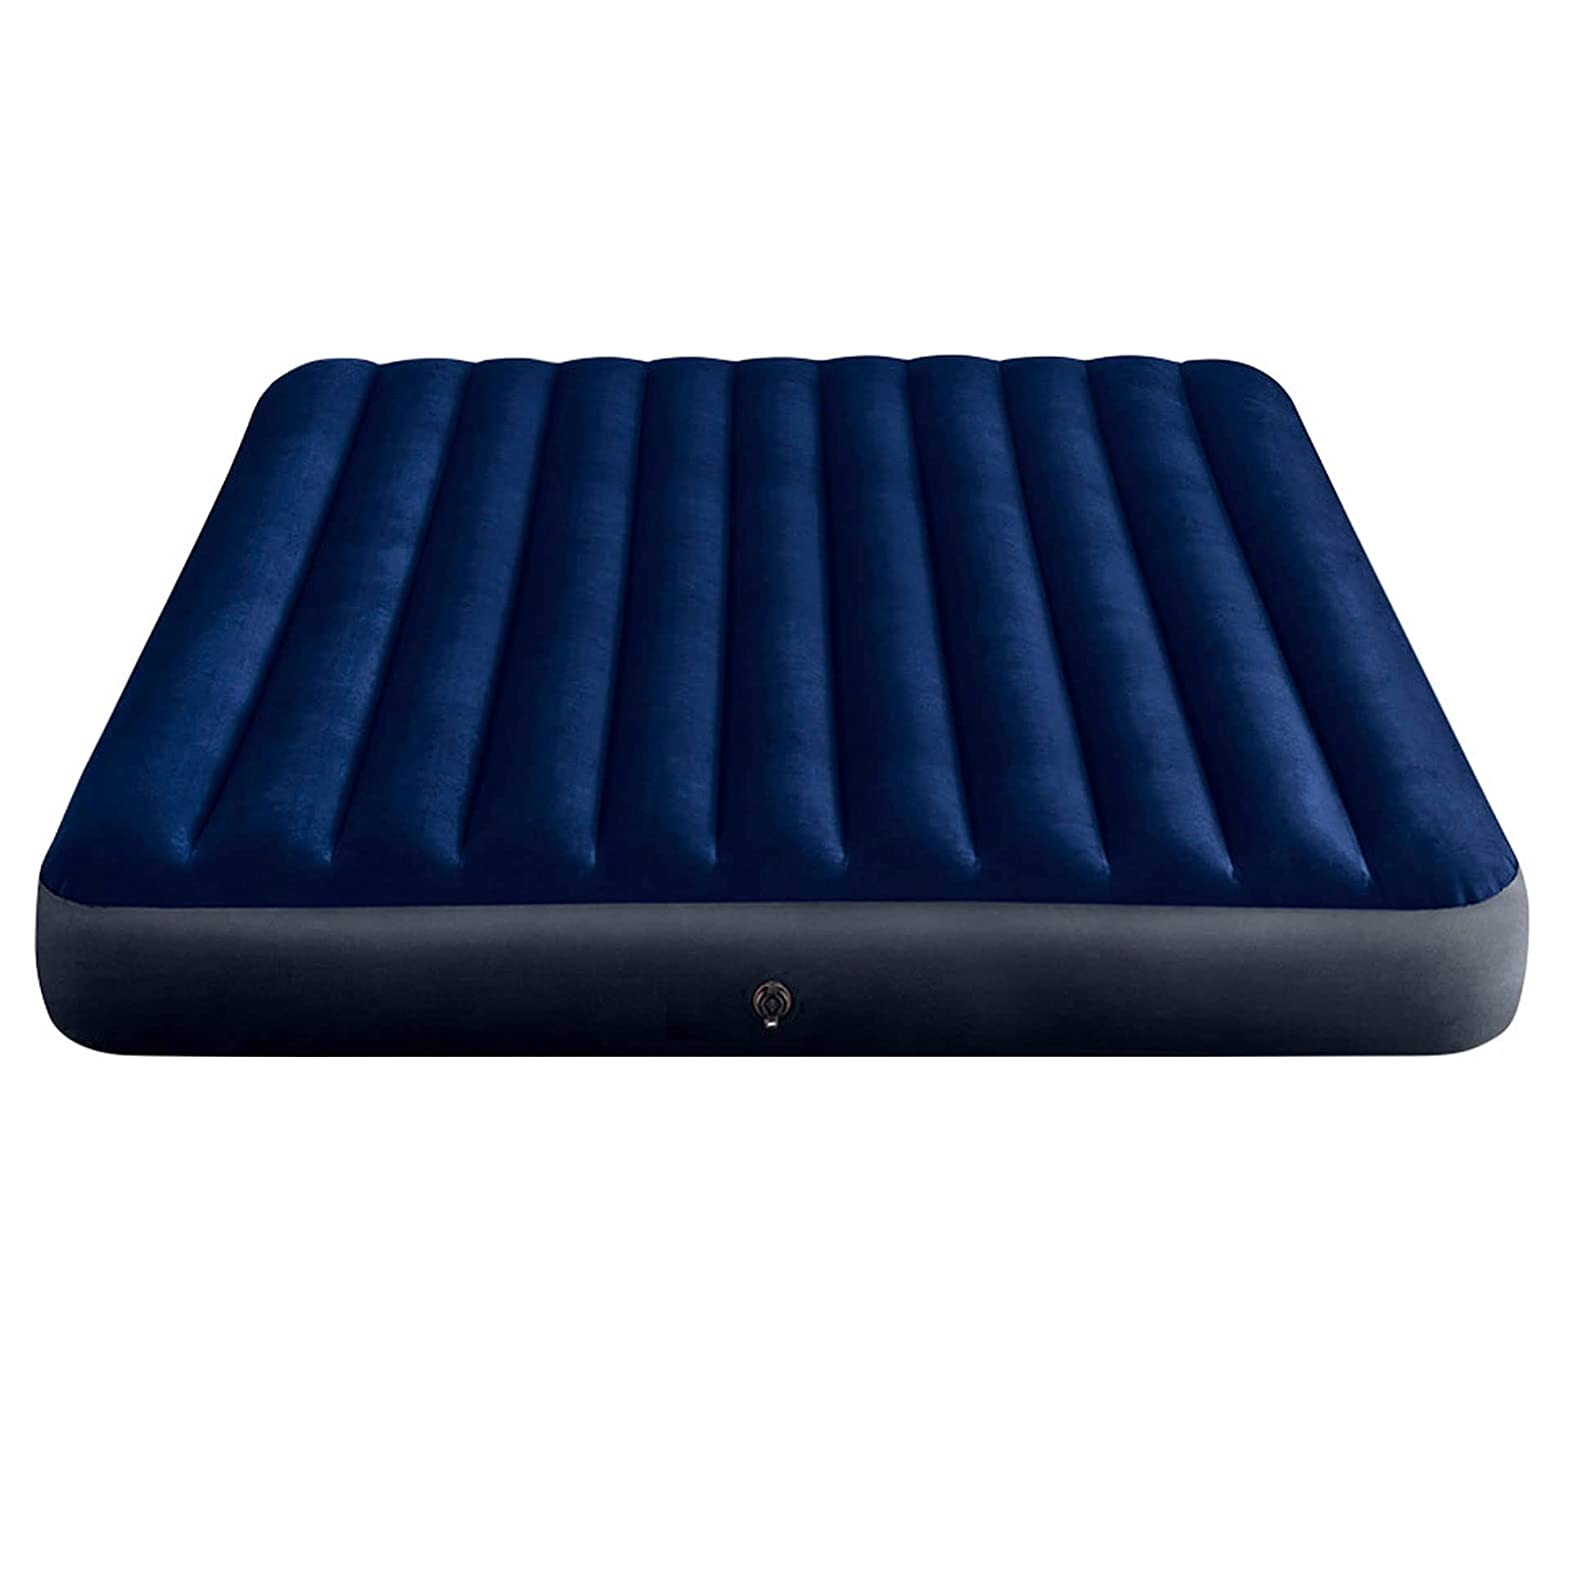 INTEX Airbed 39"x75"x10" Twin Size Classic Downy Dura-Beam With Fiber-Tech Technology Standard Series